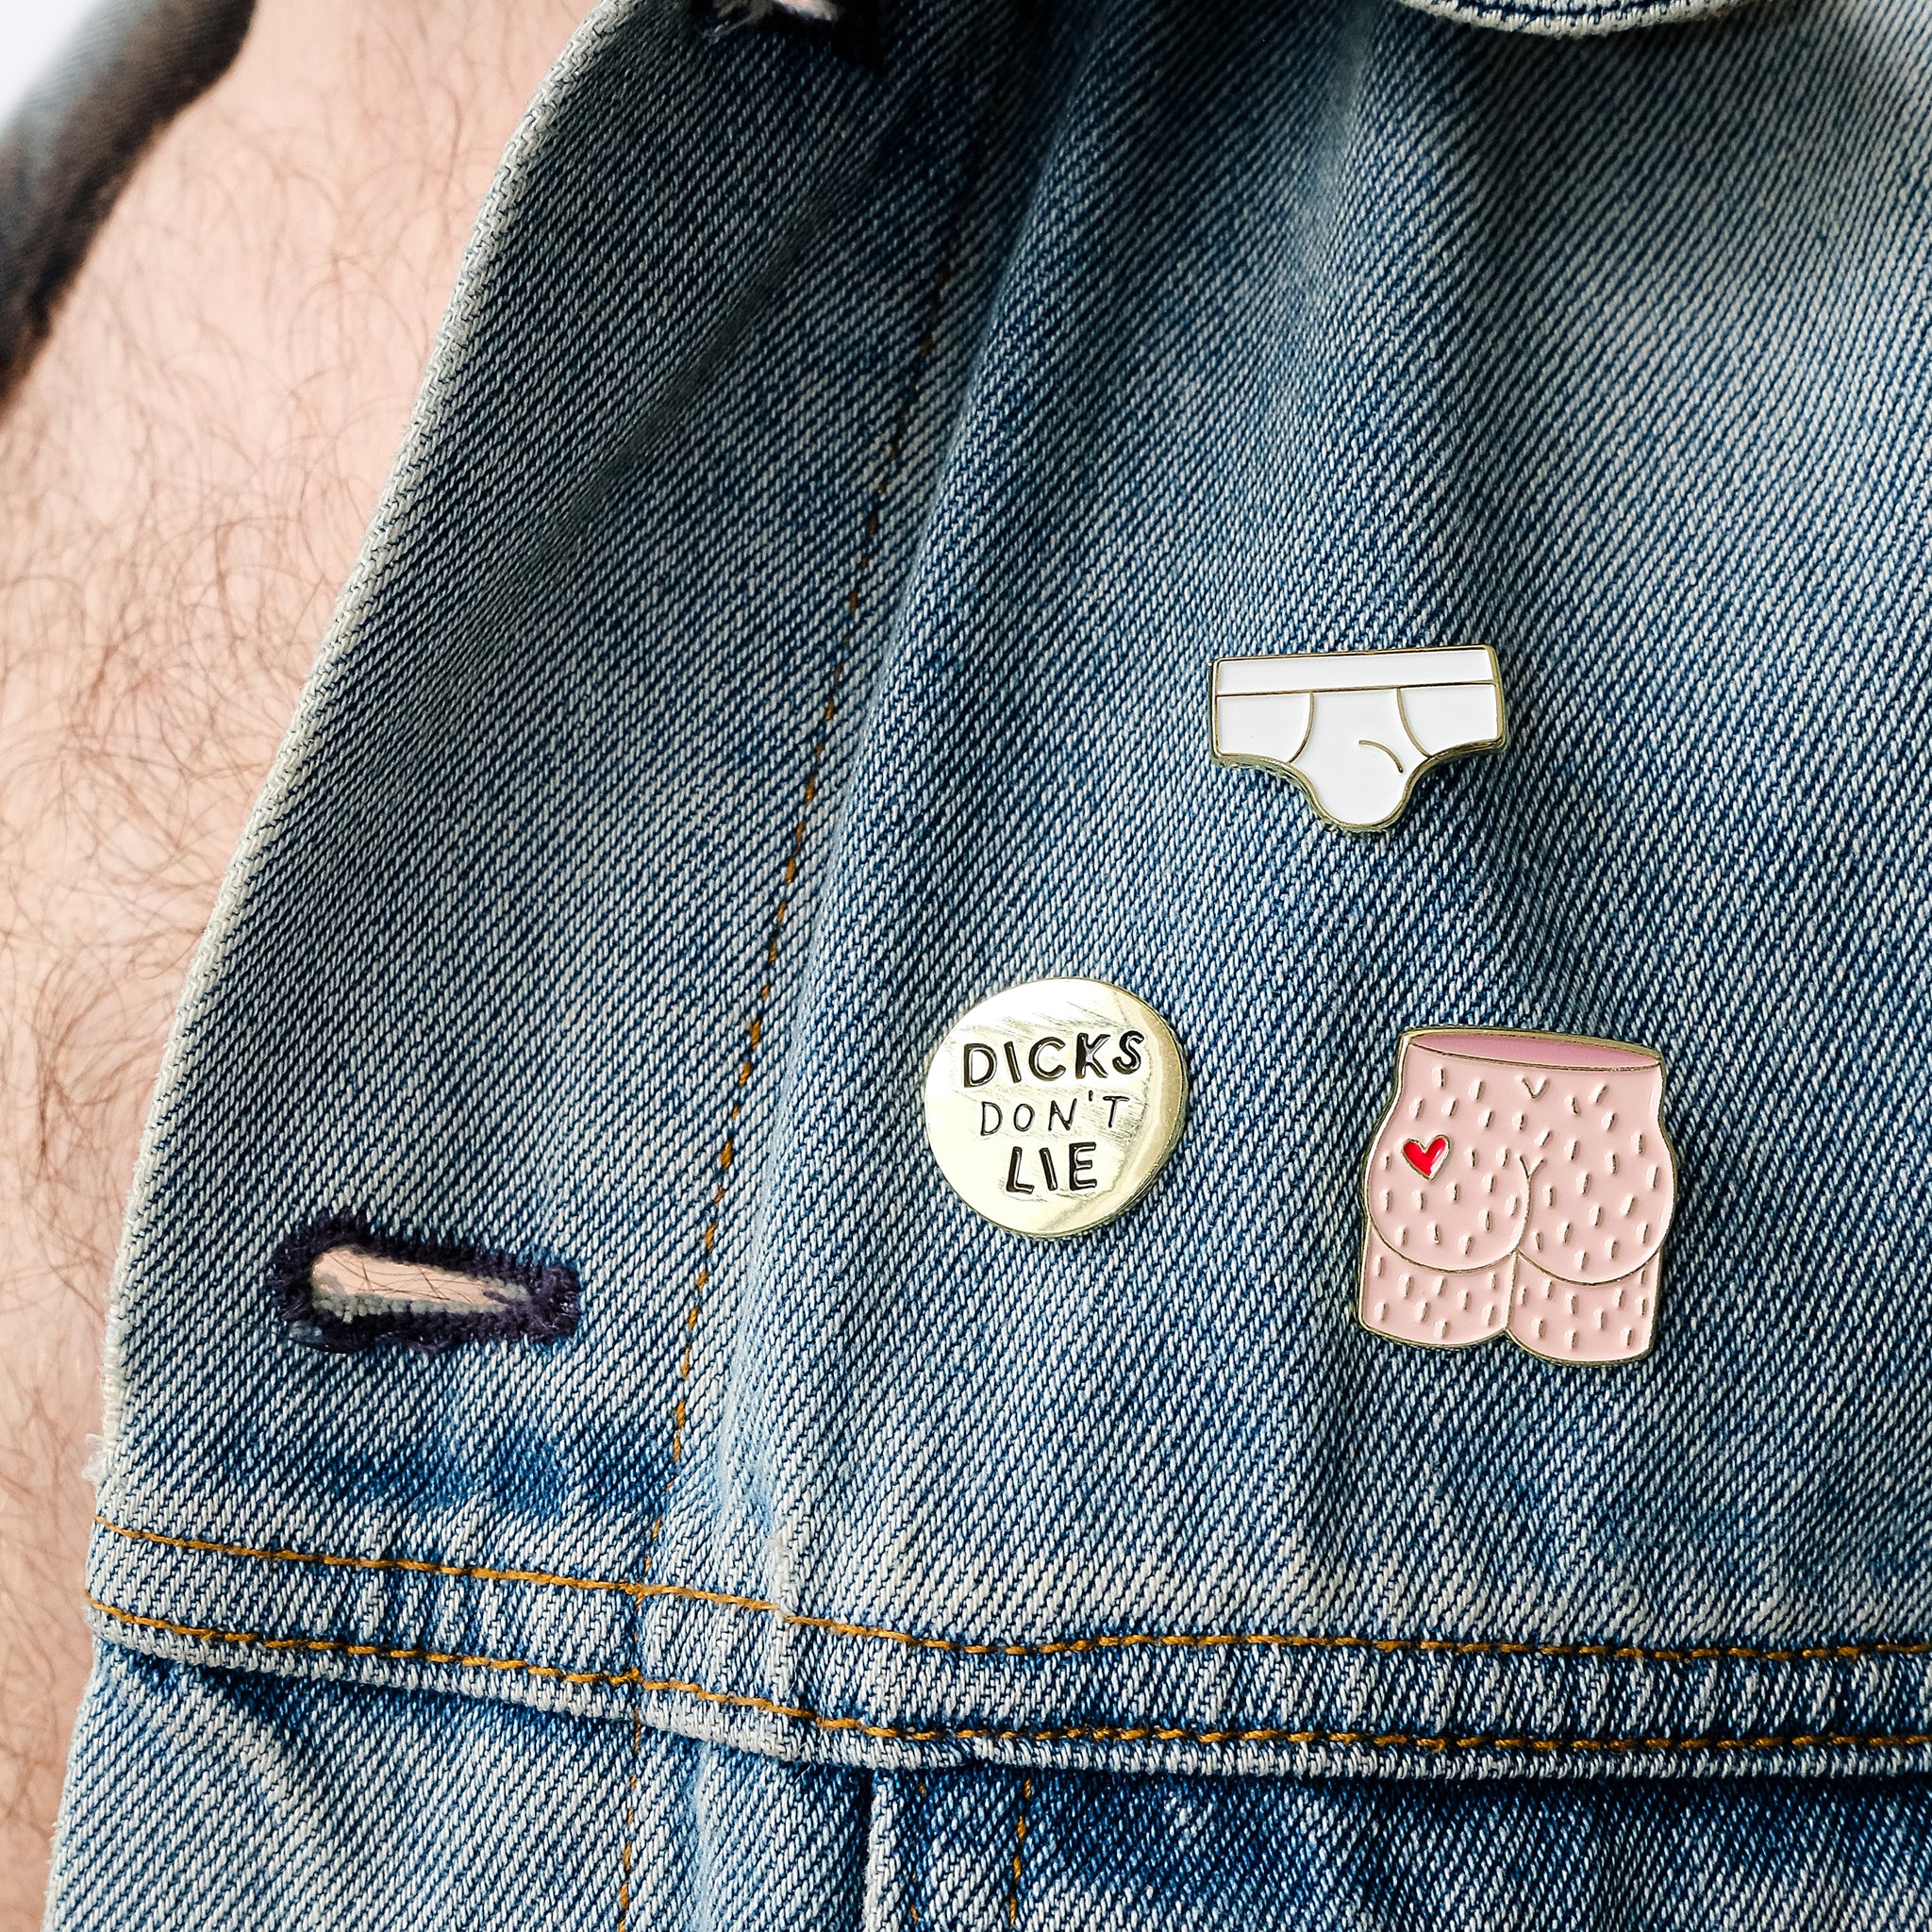 Dicks Don't Lie Arty Farty - Pin